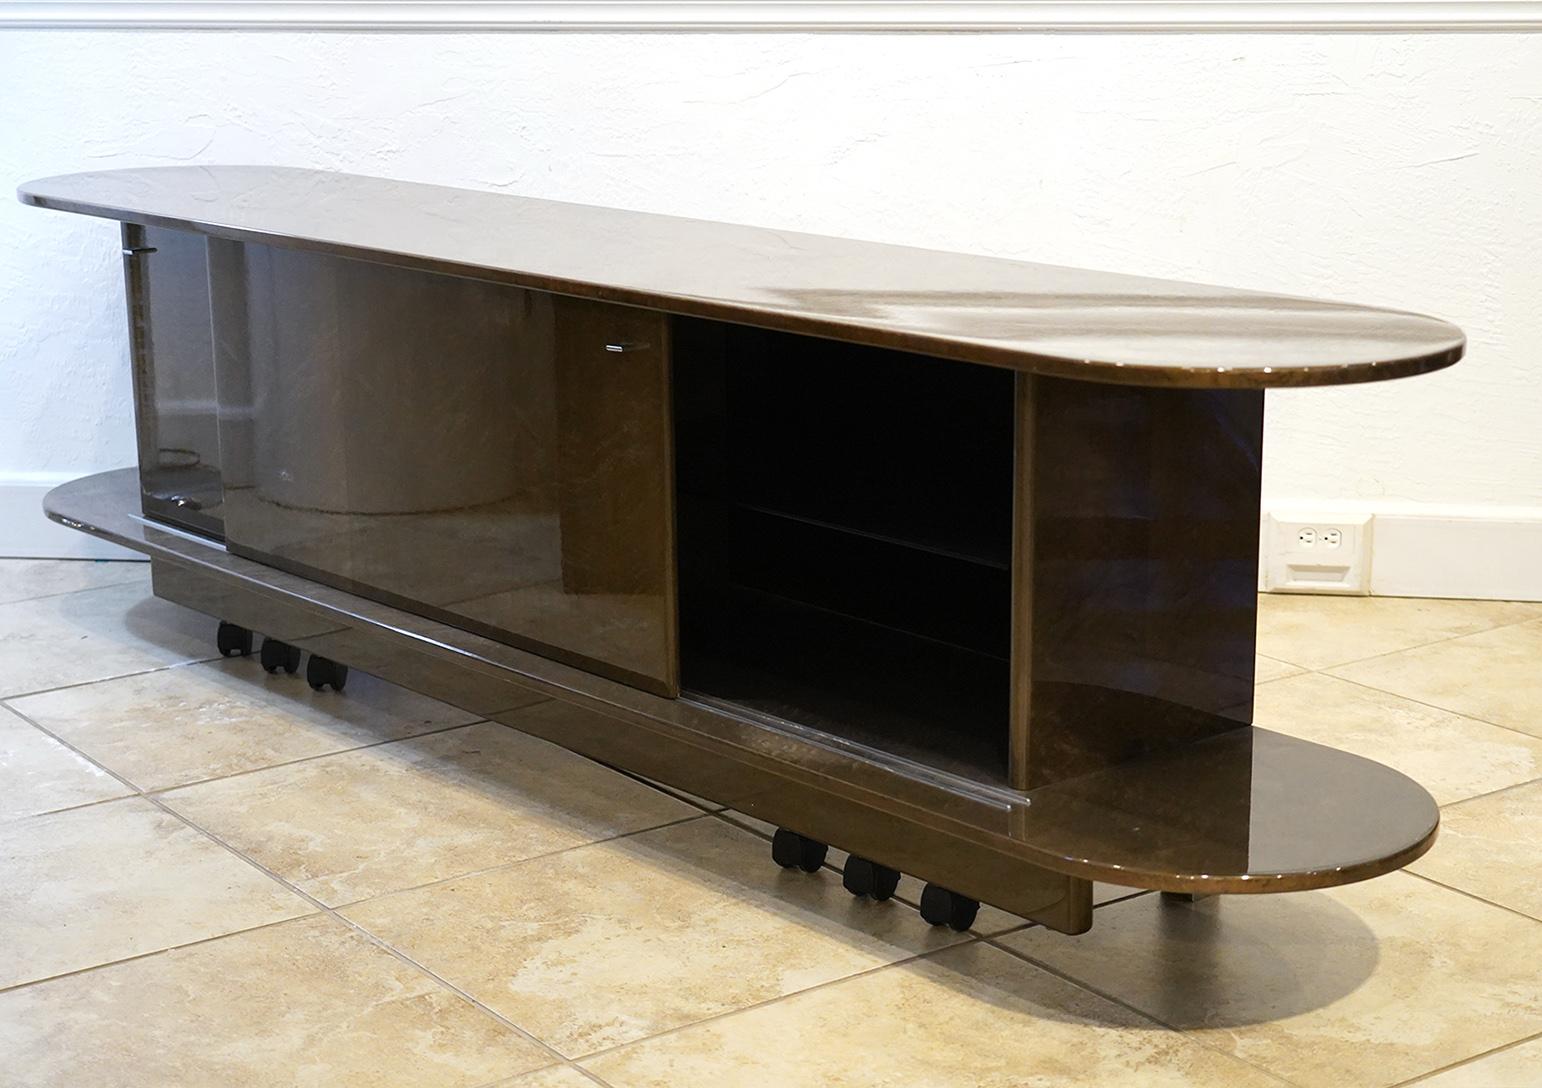 This Italian design credenza features a long top with rounded ends corresponding with a bottom of identical size and design. Between those two levels sliding doors open up to glass shelved interiors creating an elegant minimalist horizontal effect.